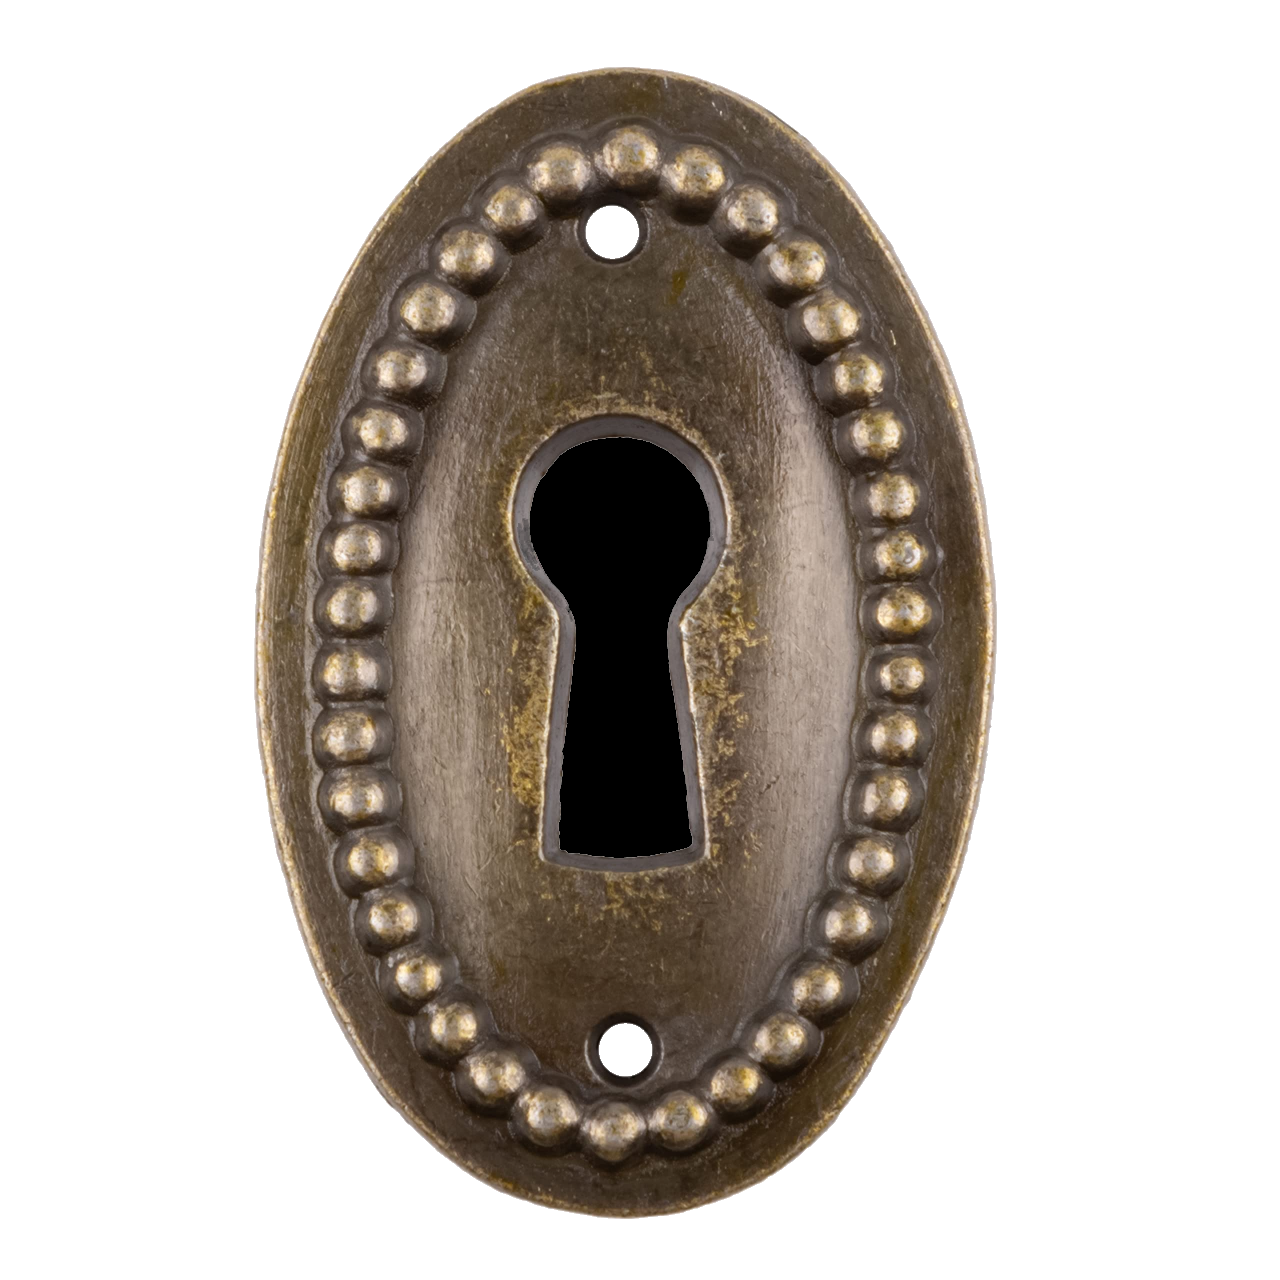 an image of an antique keyhole